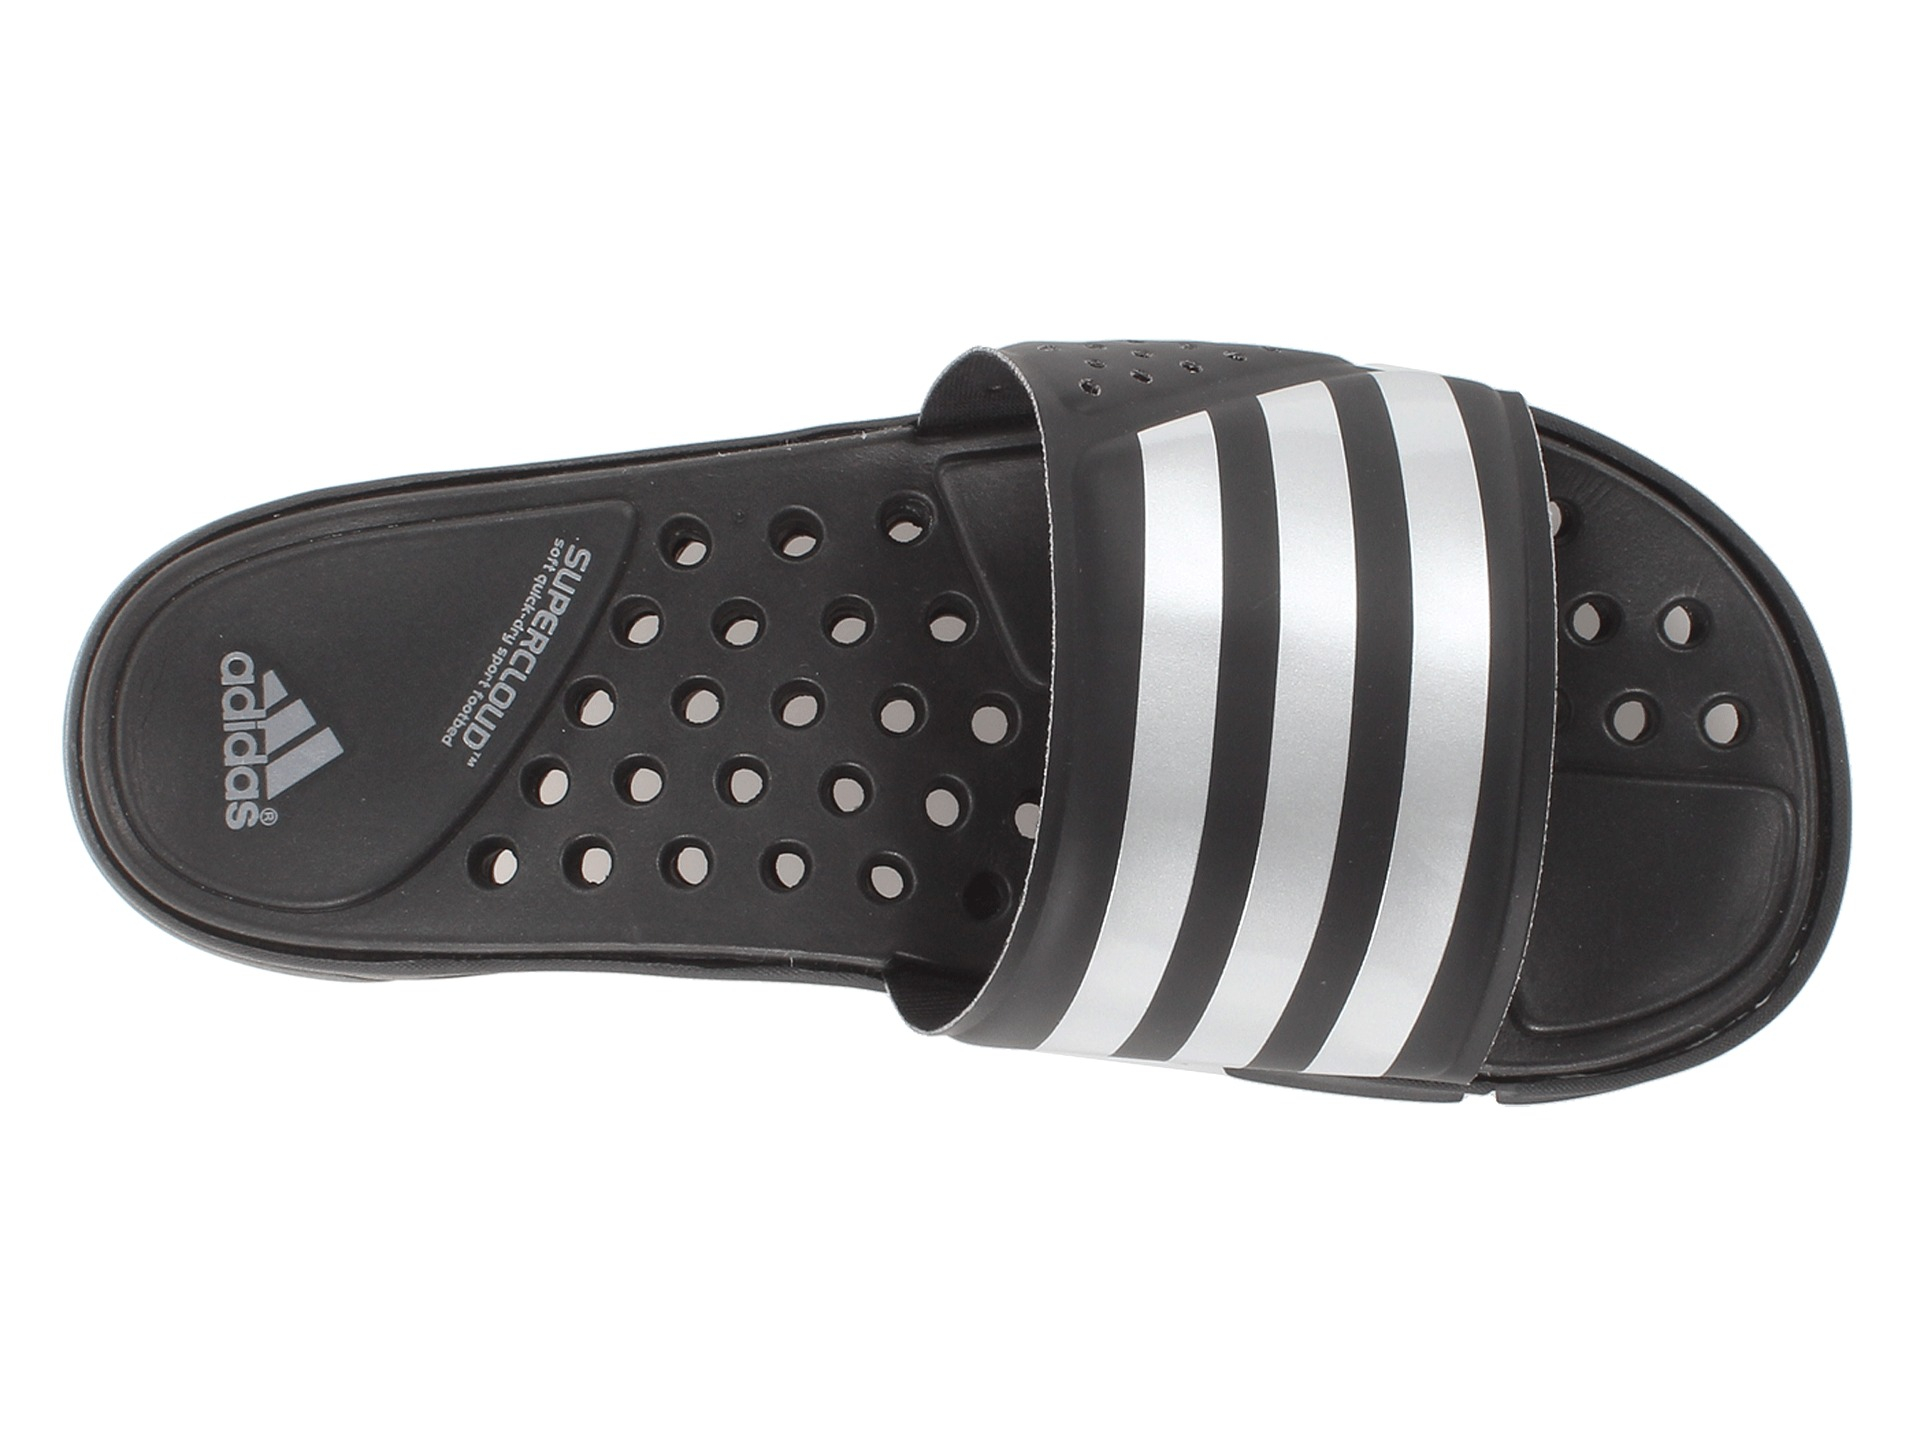 adidas climacool chill recovery slide